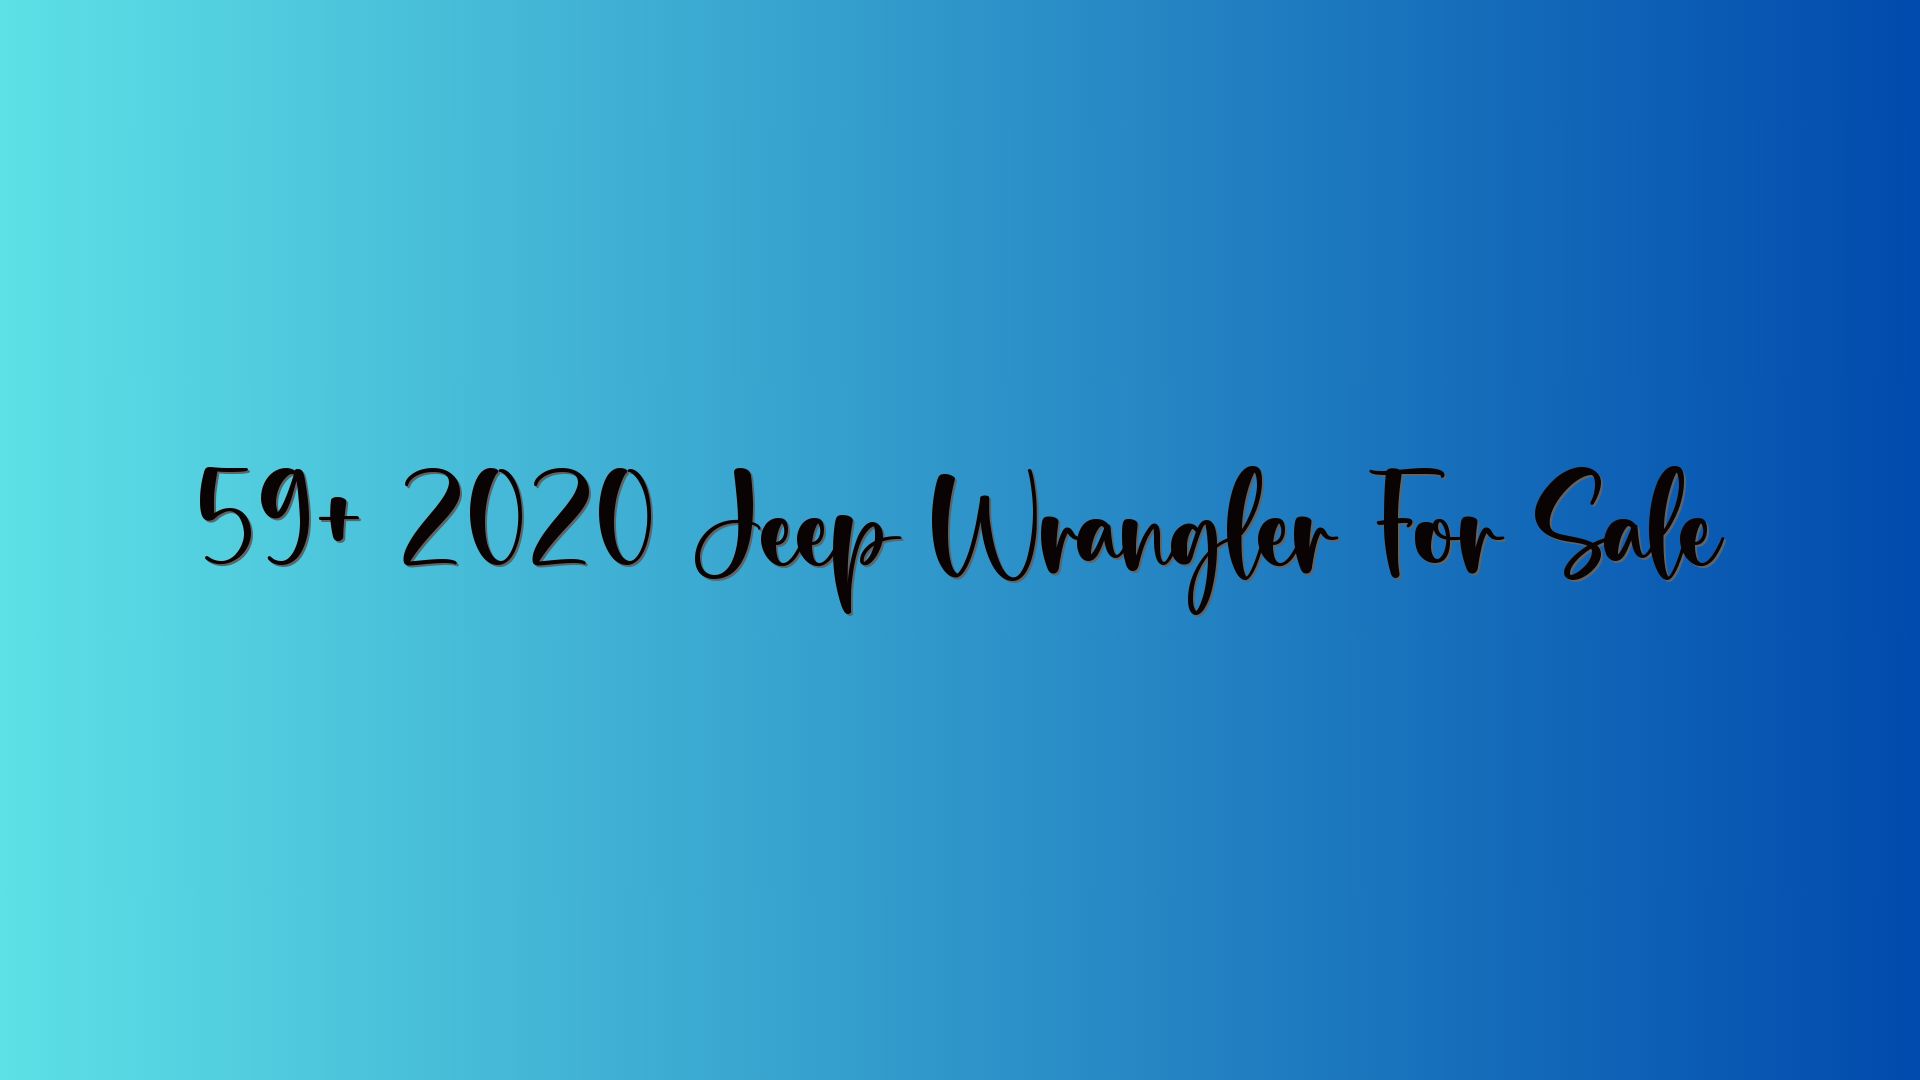 59+ 2020 Jeep Wrangler For Sale